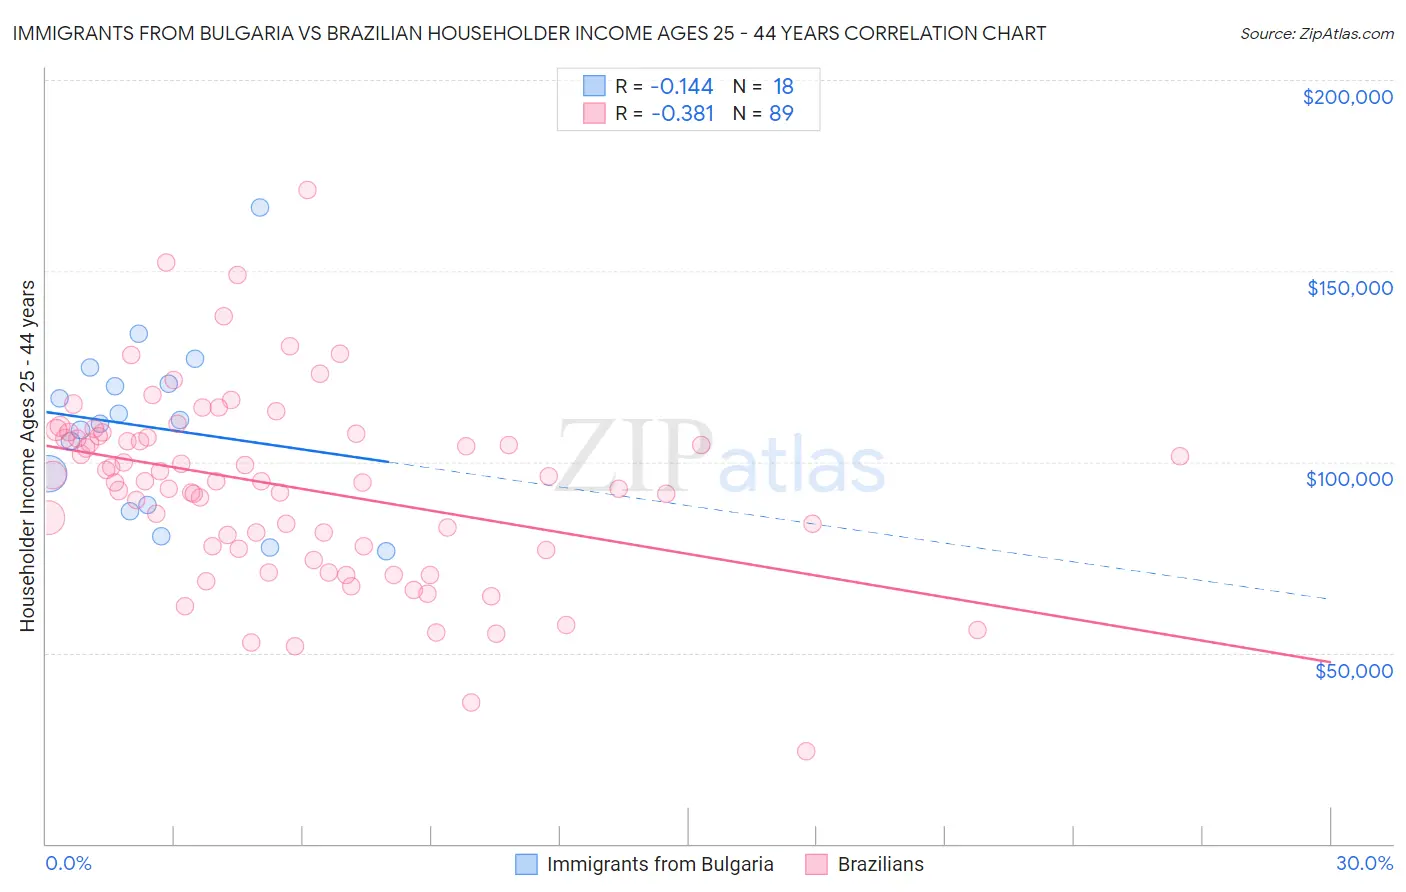 Immigrants from Bulgaria vs Brazilian Householder Income Ages 25 - 44 years